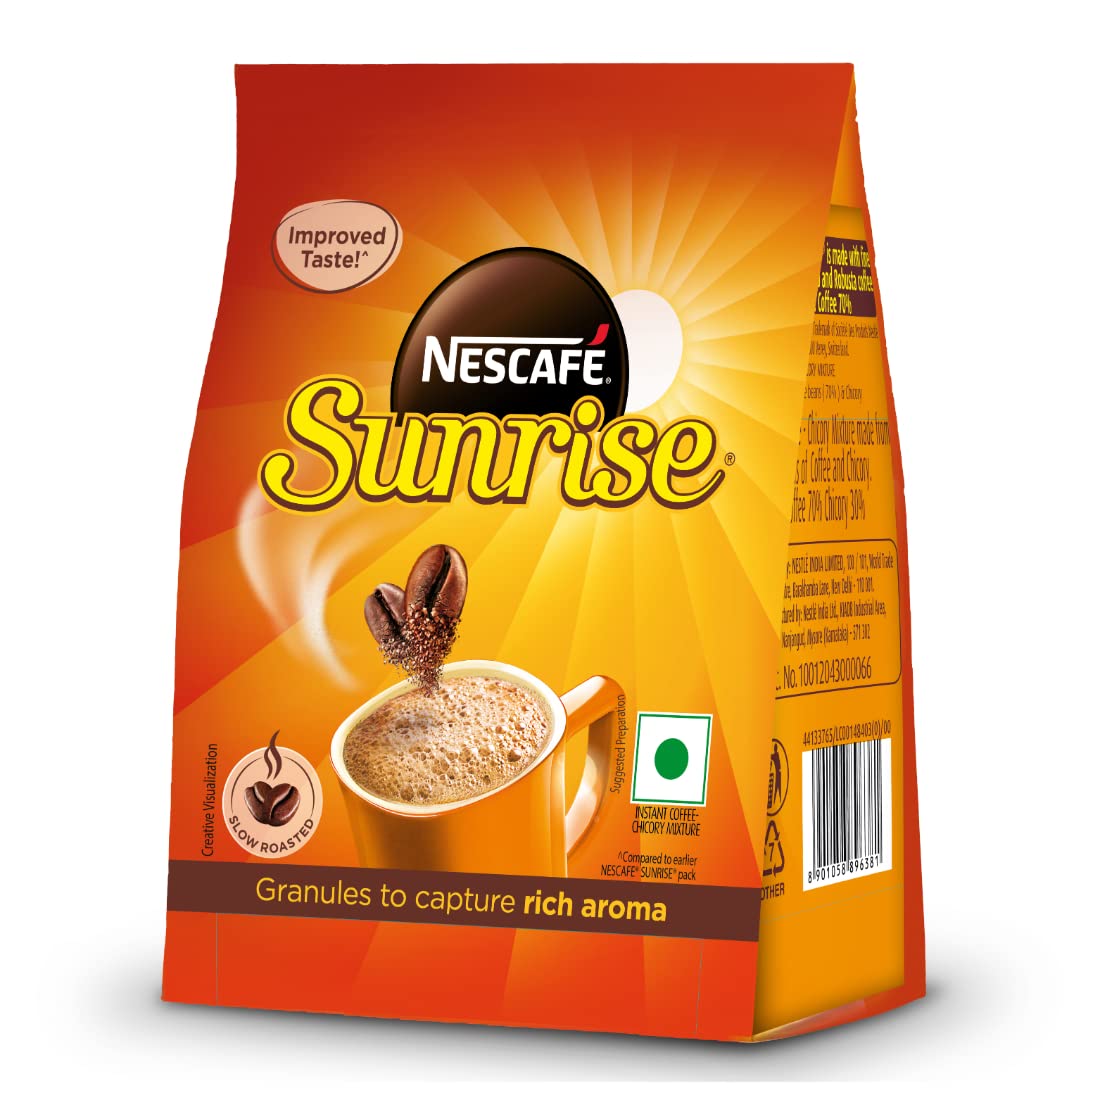 NESCAFE Sunrise Rich Aroma, Instant Ground Coffee Pouch-Chicory Mix, 200g Stabilo | Made With Slow Roasted Coffee Beans